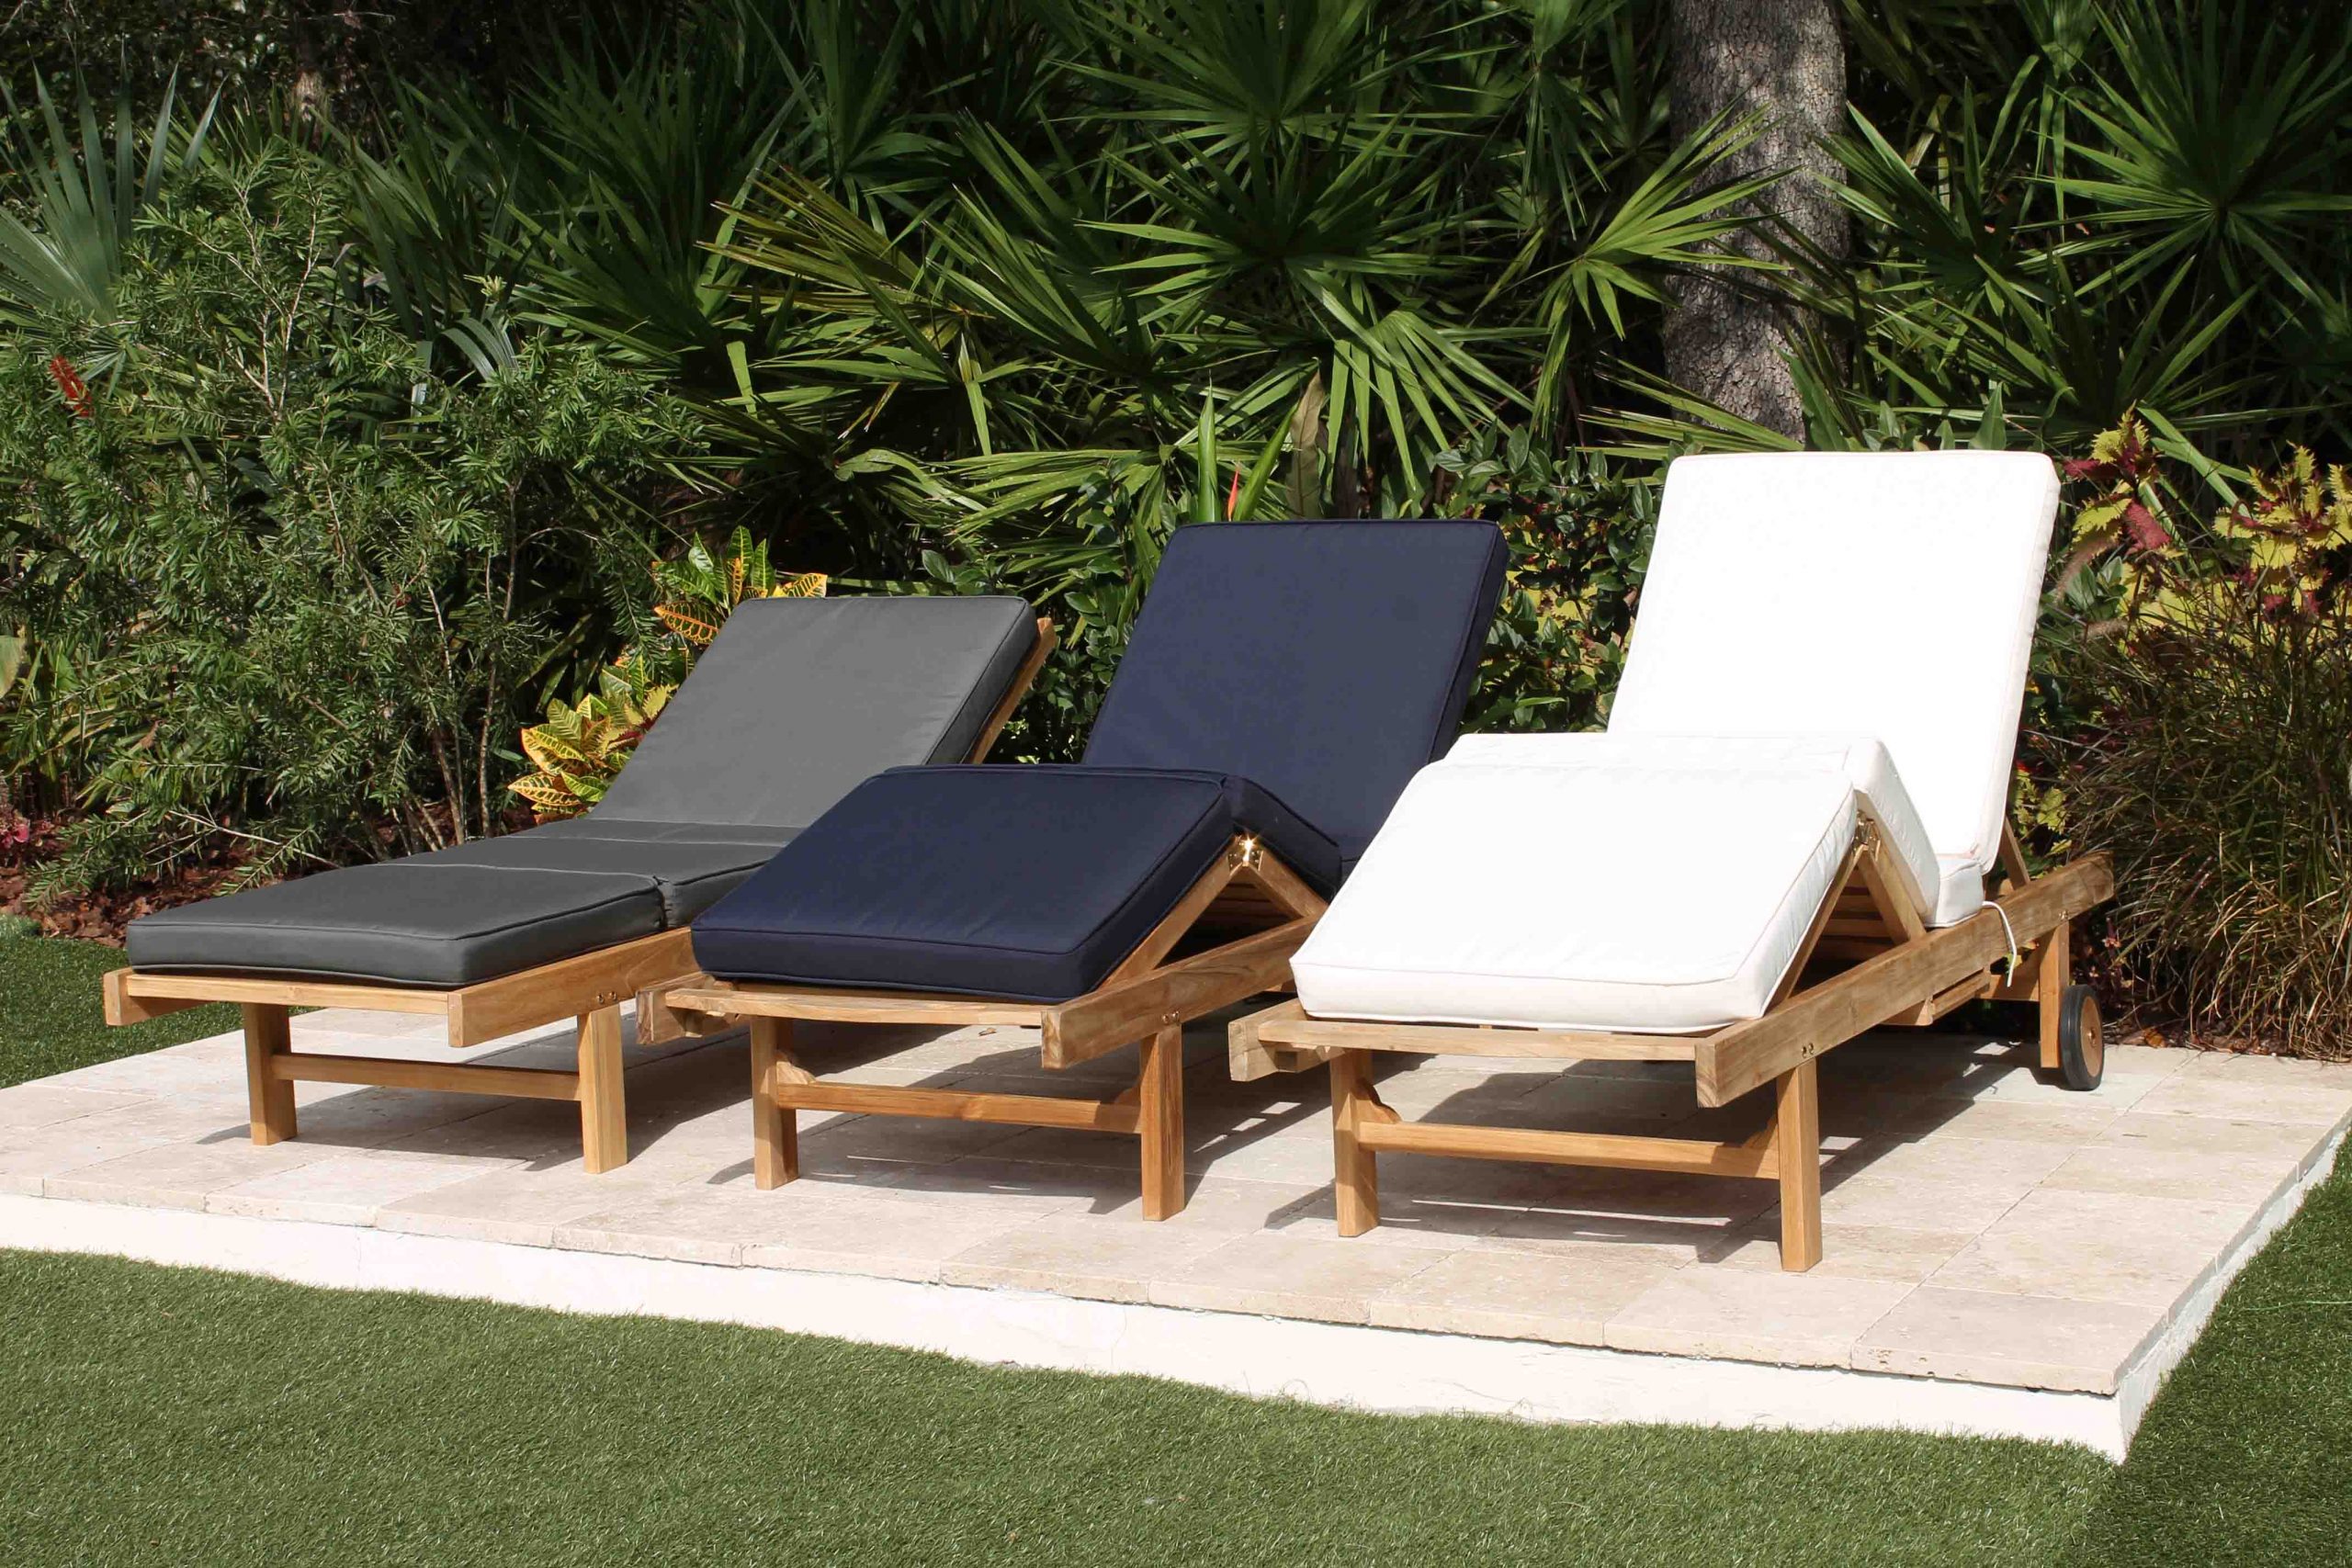 Deluxe Lounger Cushions - side